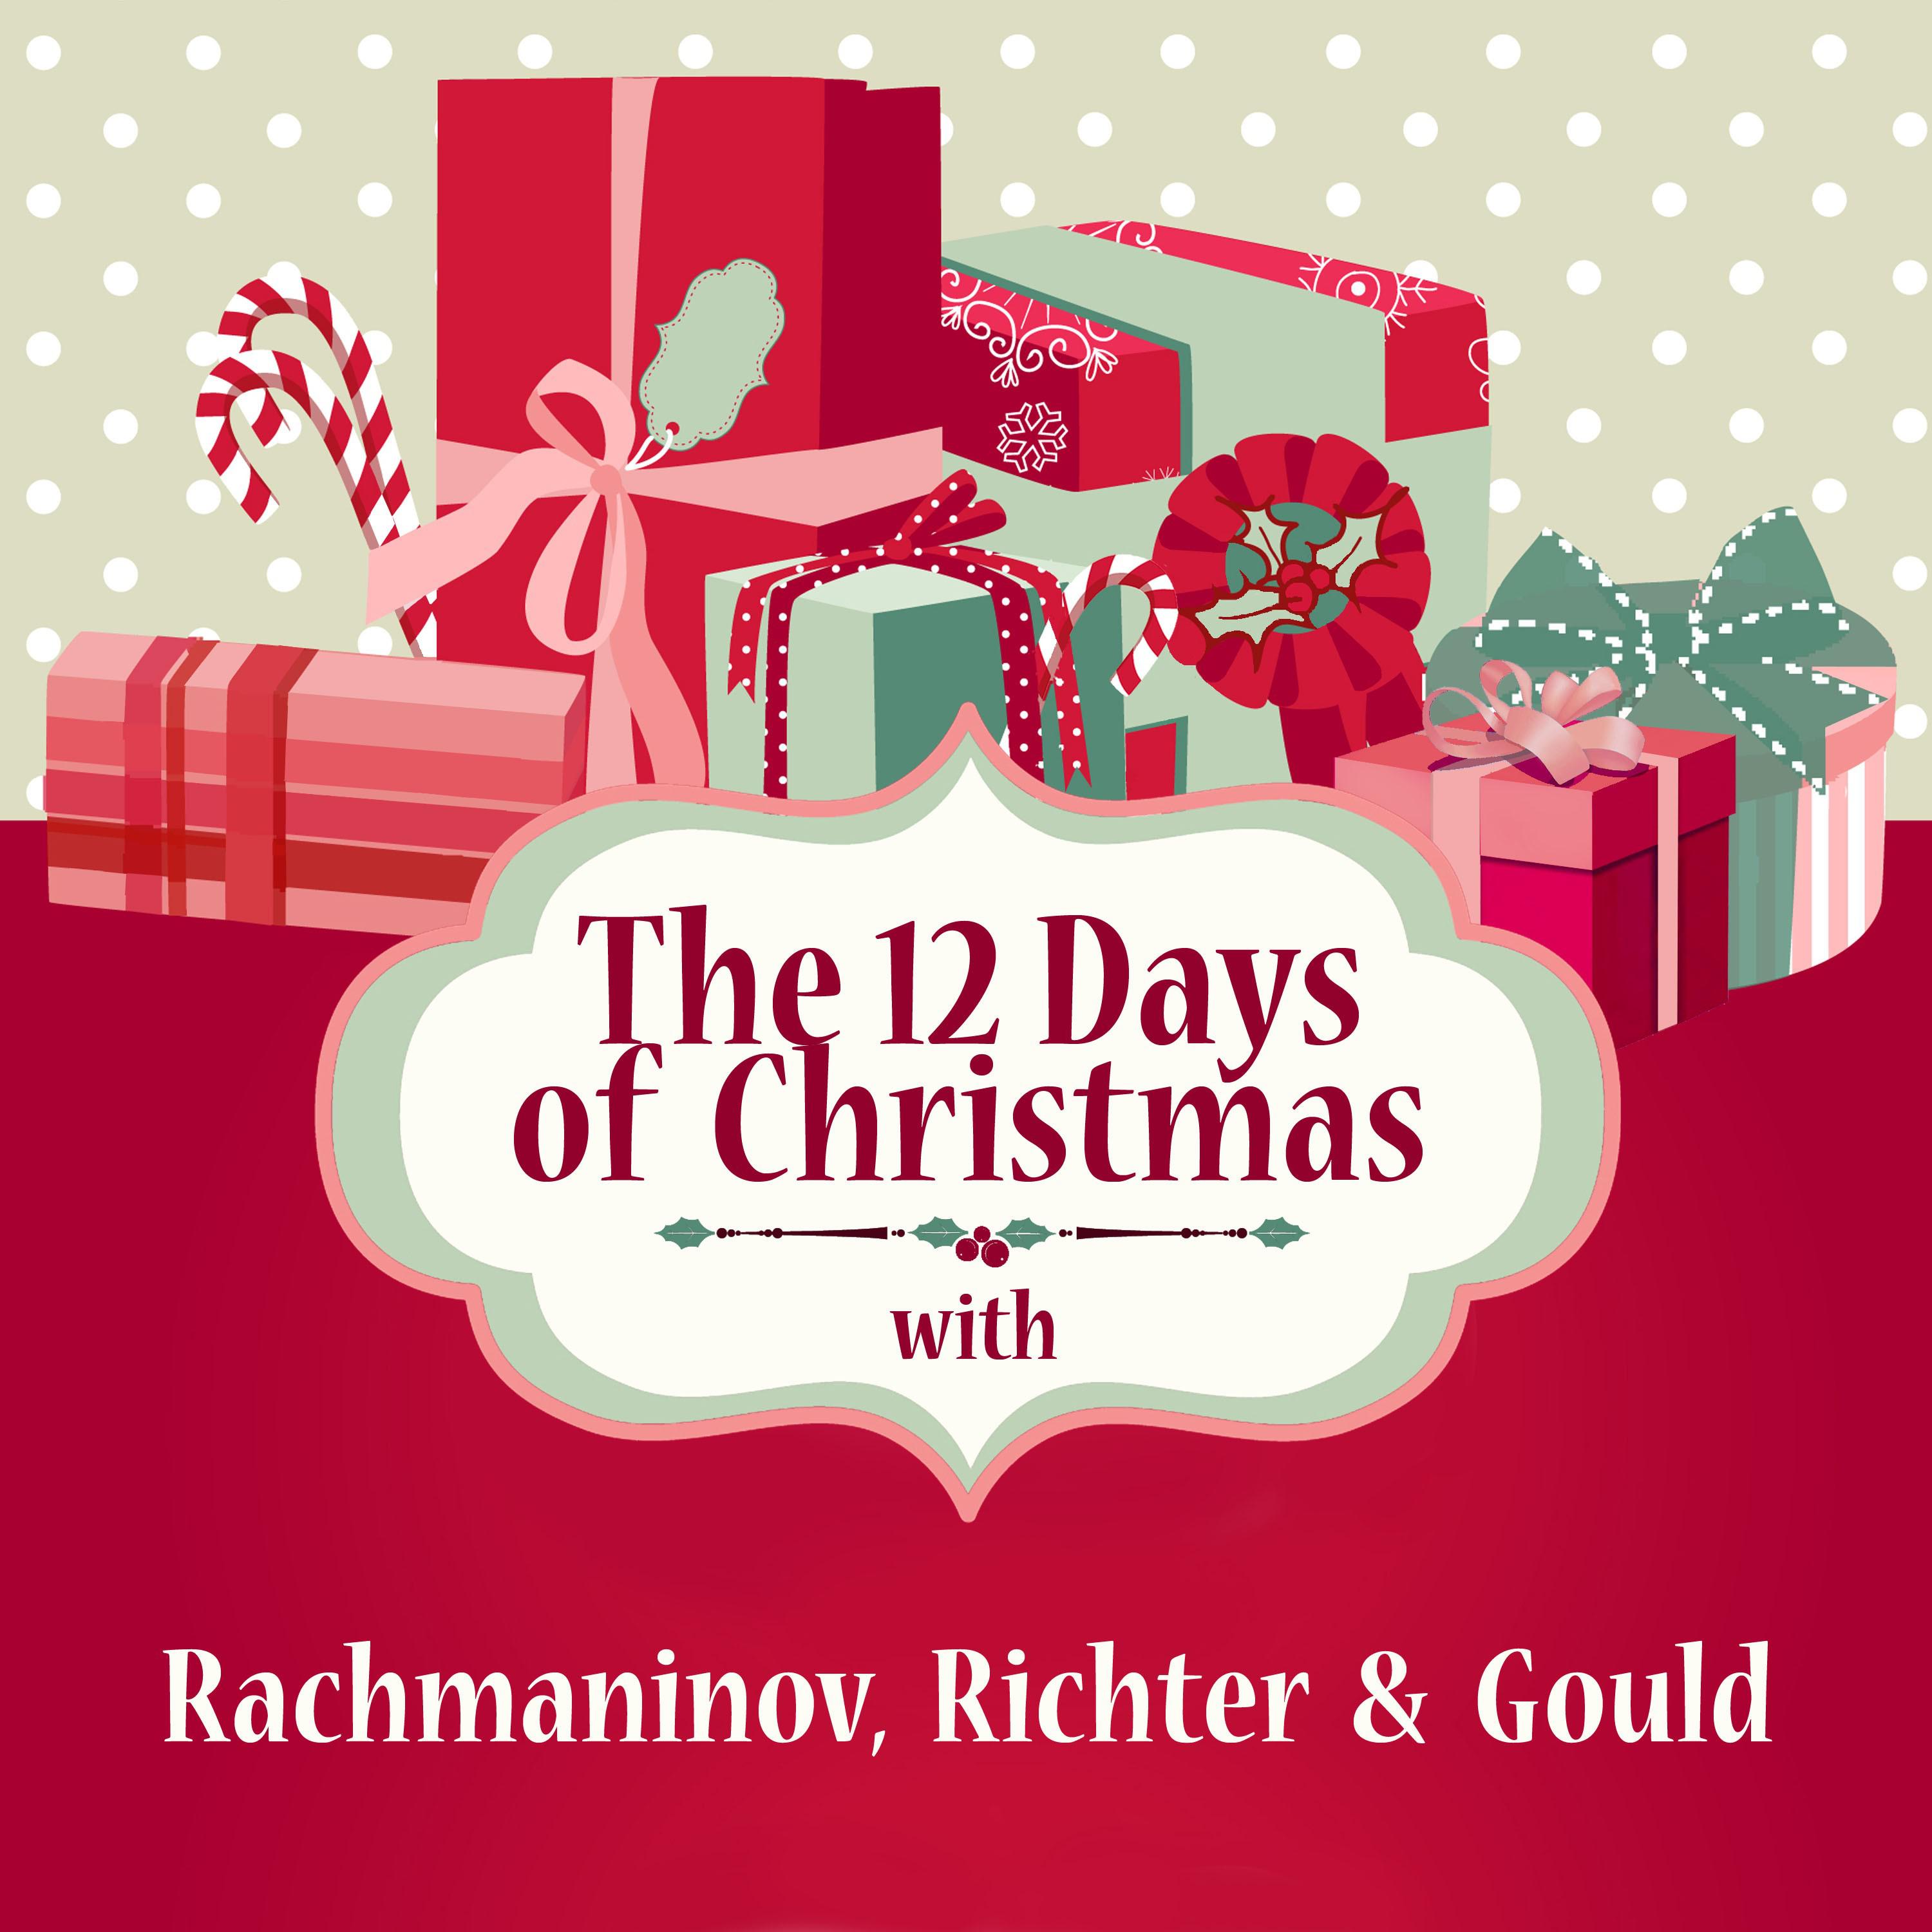 The 12 Days of Christmas with Rachmaninov, Richter & Gould